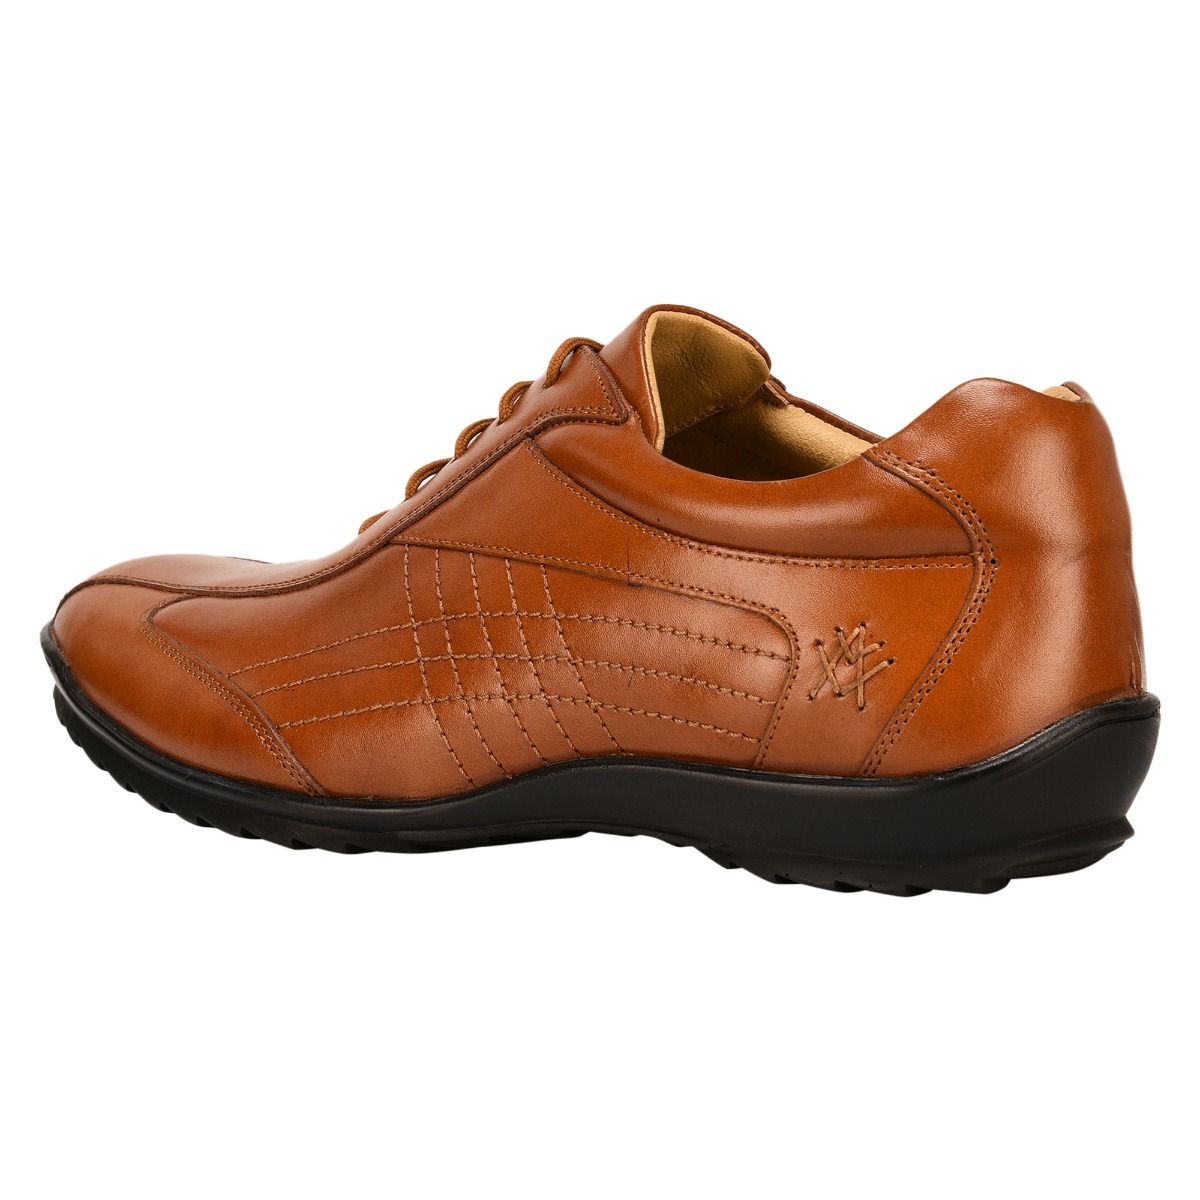 LIBERTYZENO Men's Walking Sneakers Genuine Leather Casual Lace Up Shoes - image 3 of 5